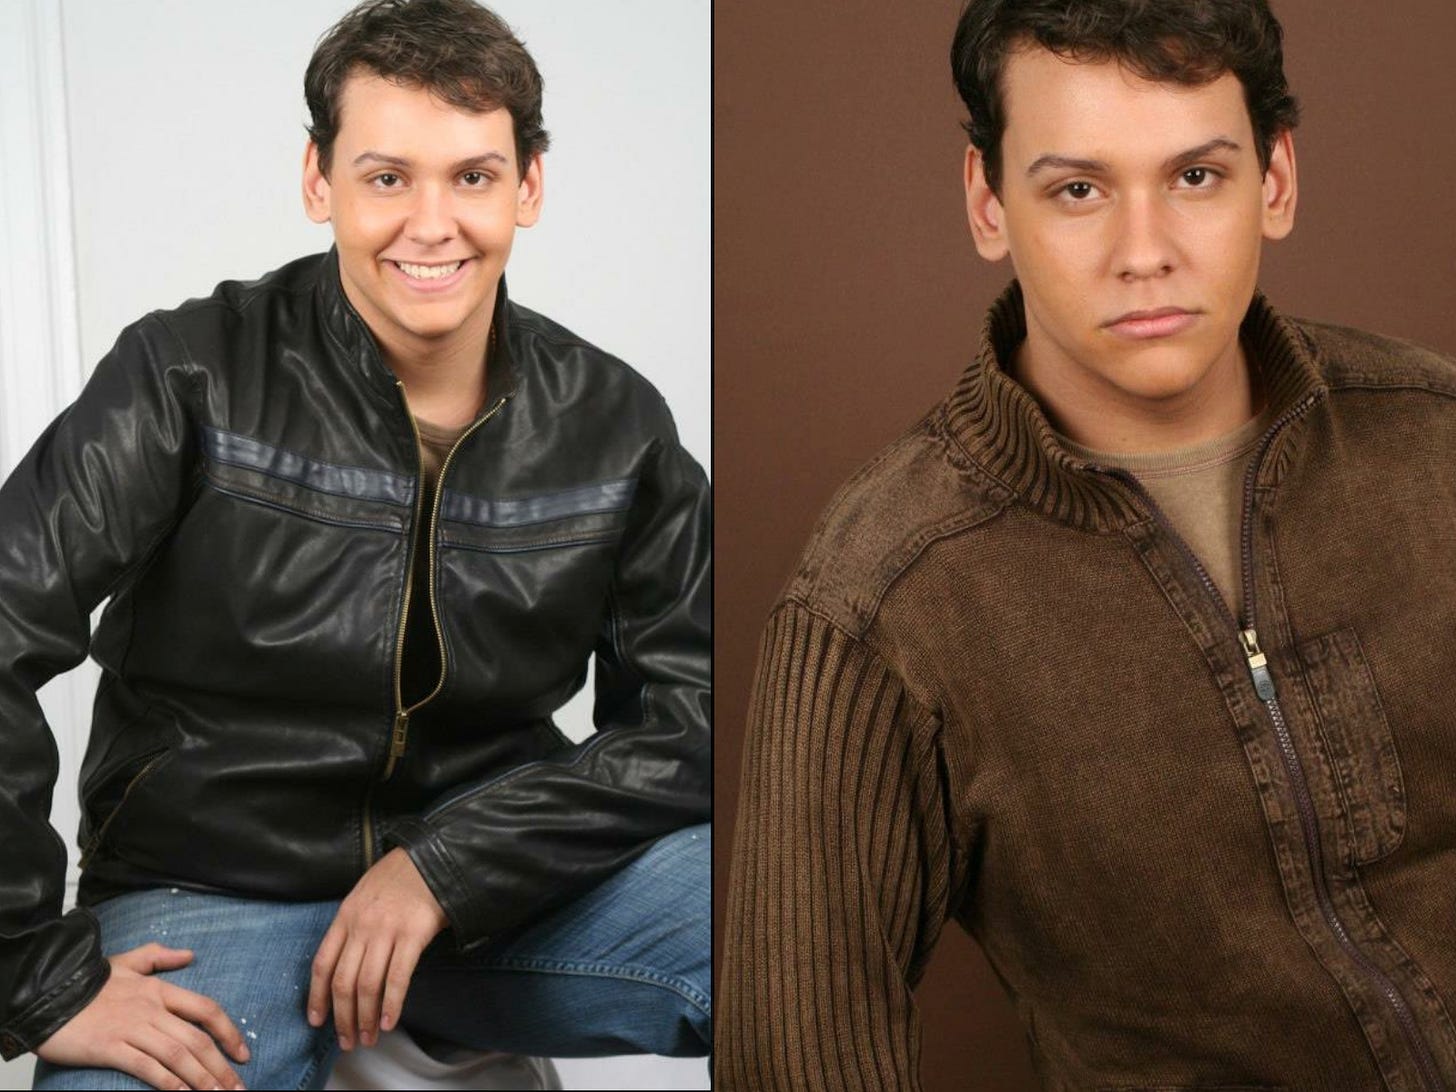 image 1: Young George Santos smiling in a leather bomber jacket, image 2: young george santos in a brown suede jacket